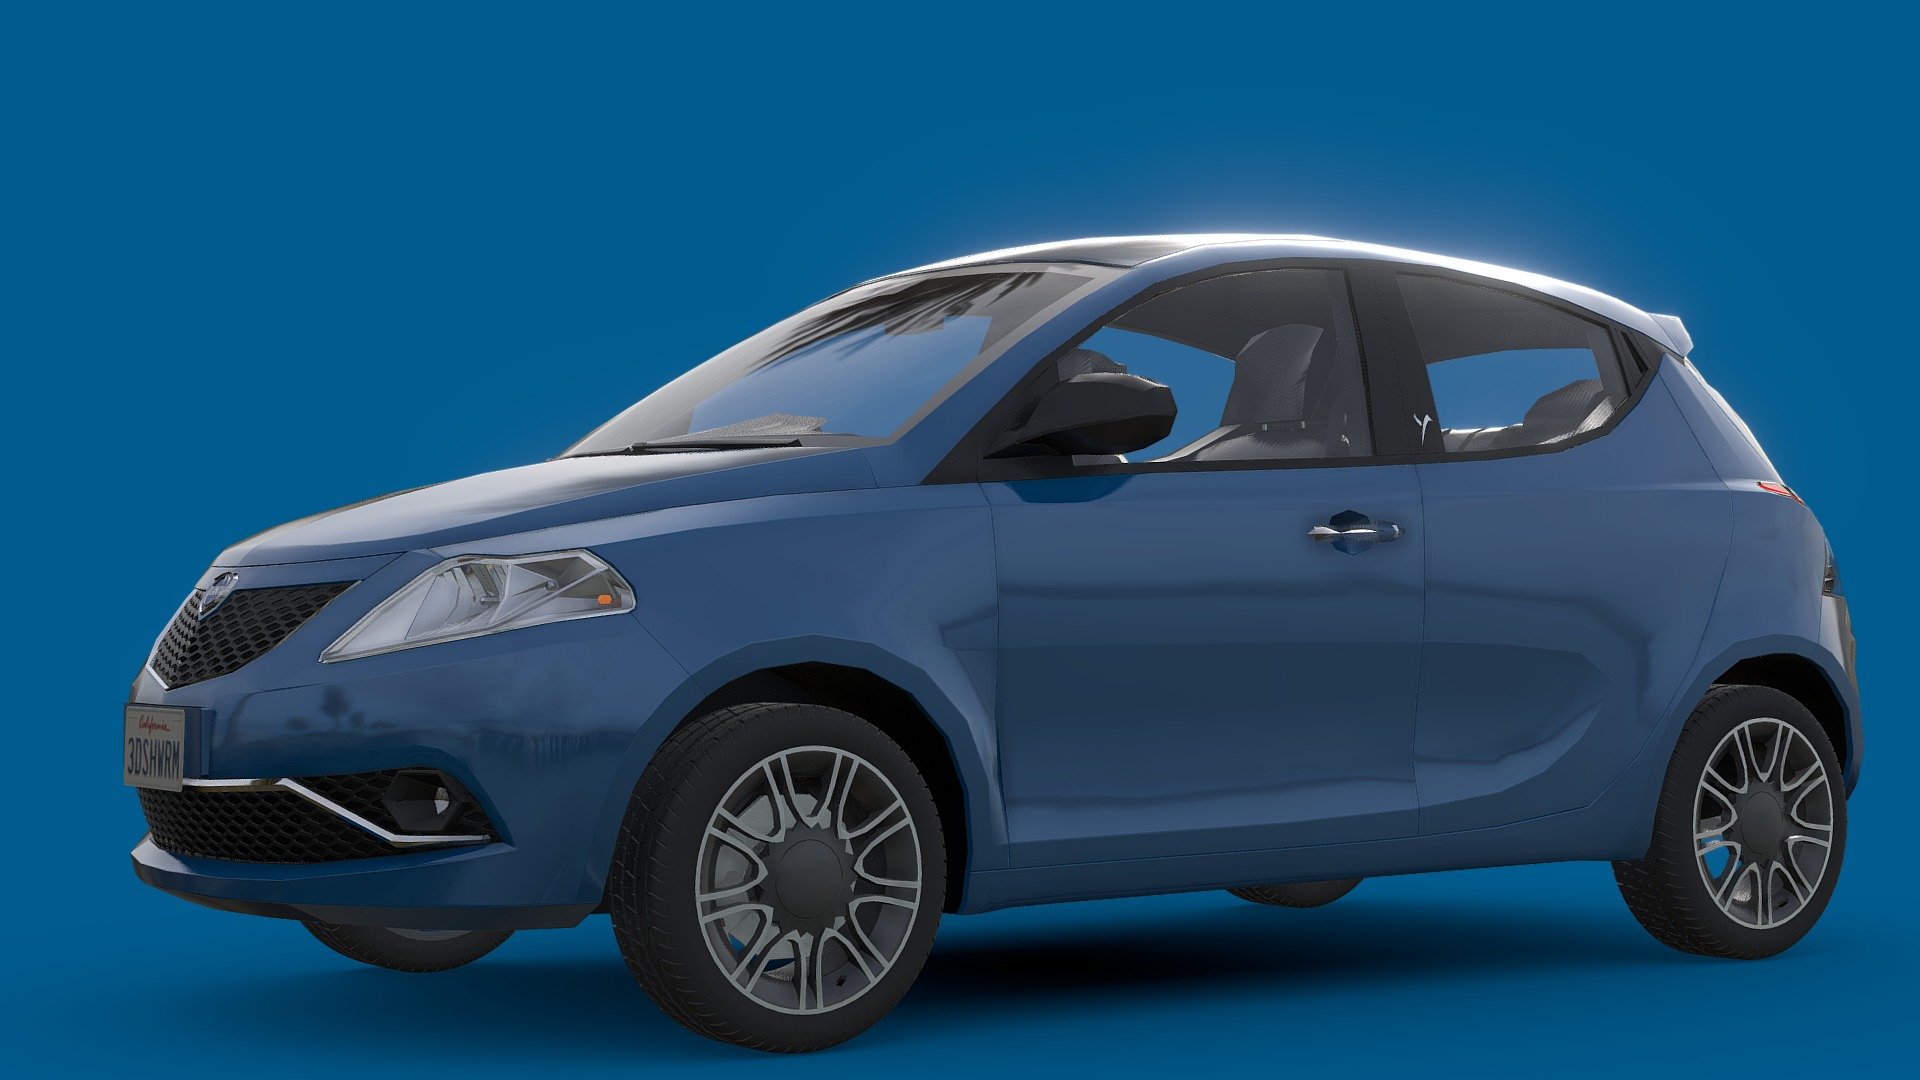 The Lancia Ypsilon is a supermini manufactured and marketed by Lancia, now in its third generation and as of 2022, the marque's only model. The Ypsilon was released in 1995, as a larger and more expensive replacement to the Y10. Between 1995 and 2005, Lancia produced more than 870,000 Ypsilons in the Melfi plant in the Potenza region. The third generation Ypsilon, sharing its platform with the Fiat 500, was marketed also as the Chrysler Ypsilon in the United Kingdom, Ireland and Japan. Fiat Group discontinued the Chrysler variant in 2017, having marketed 2,000 units in 2014. It is also no longer sold in Japan, with the discontinuation of both the Lancia Voyager and Lancia Thema branding on Chrysler-built vehicles in 2015. It is currently only available in the Italian market 3d model